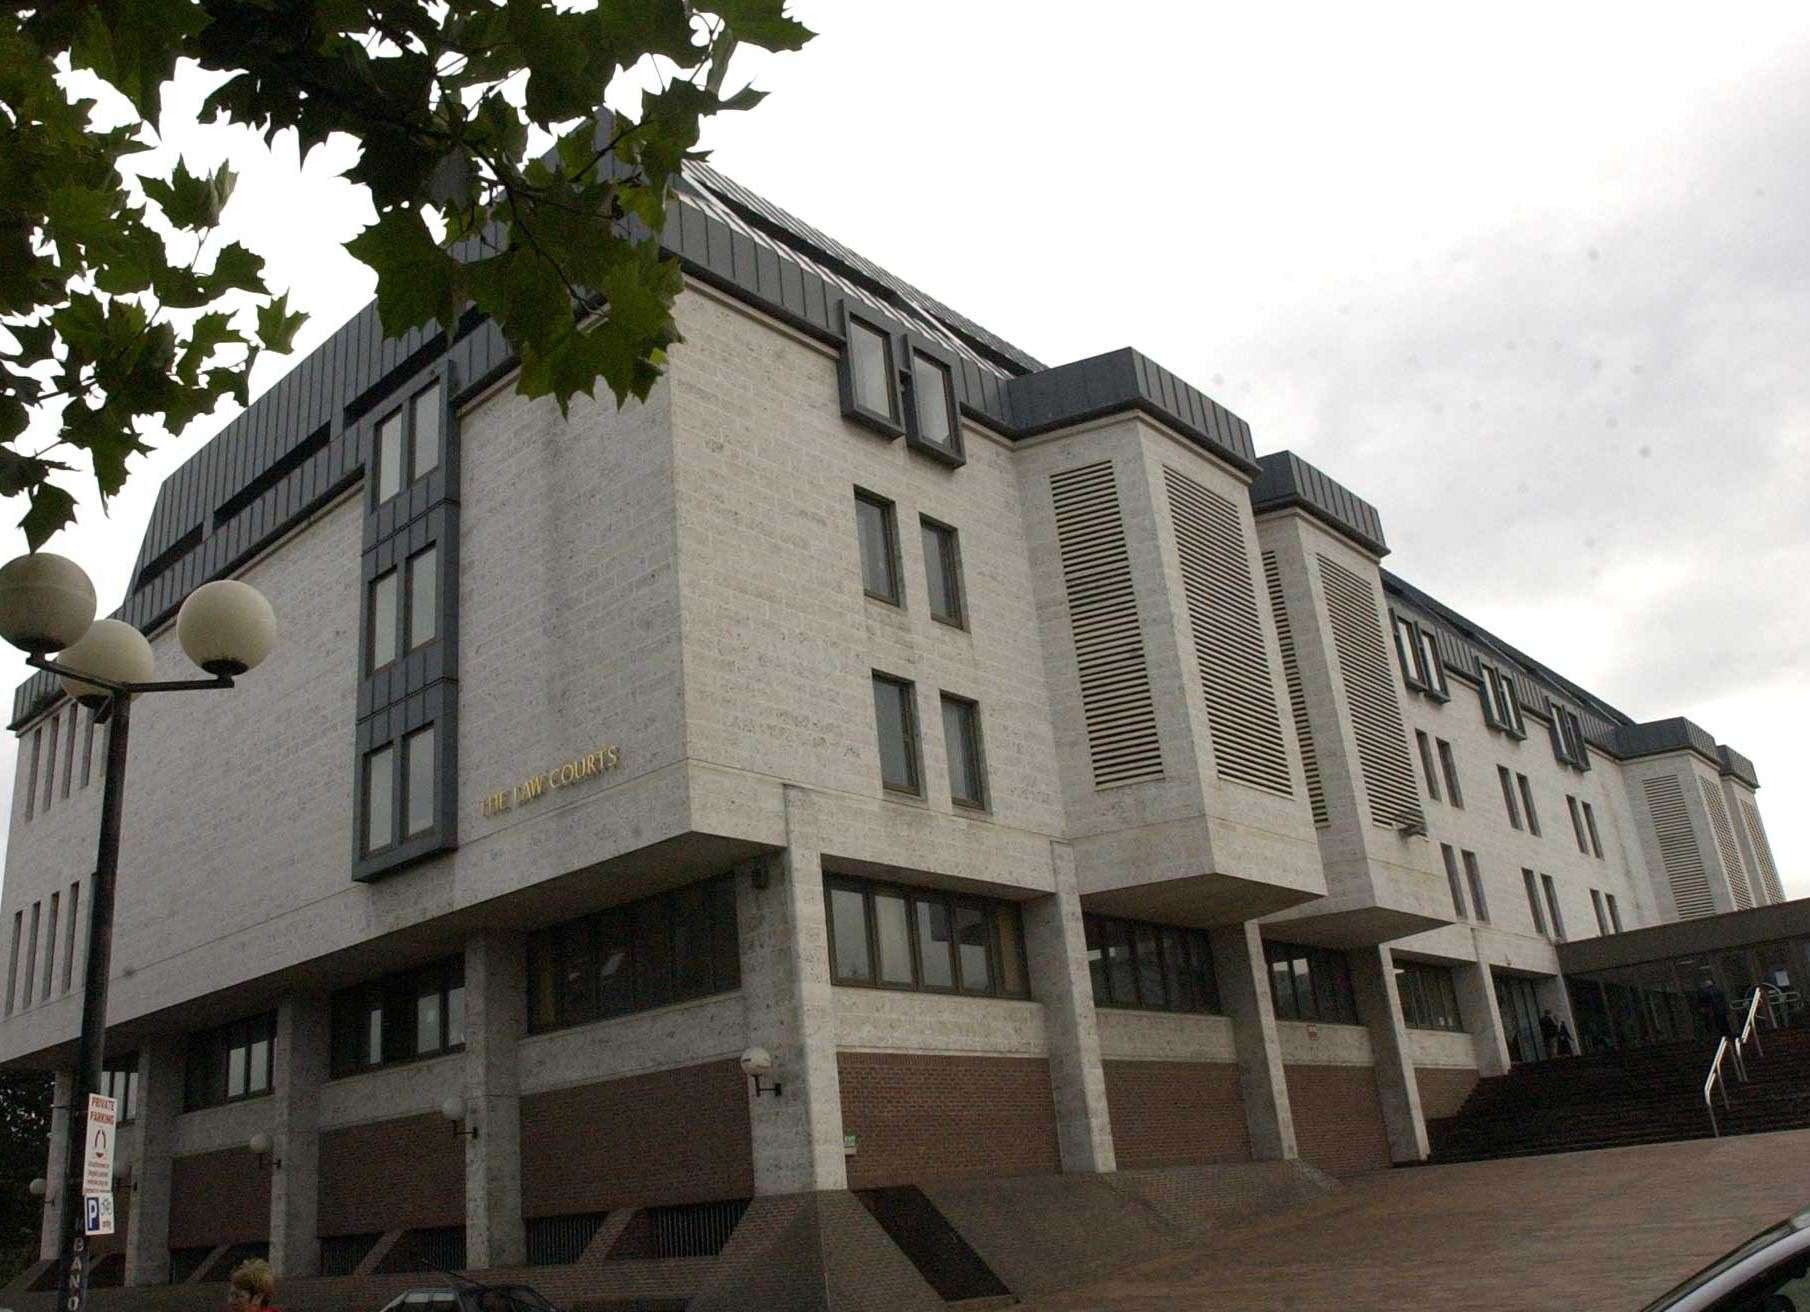 Morris was sentenced at Maidstone Crown Court on June 30